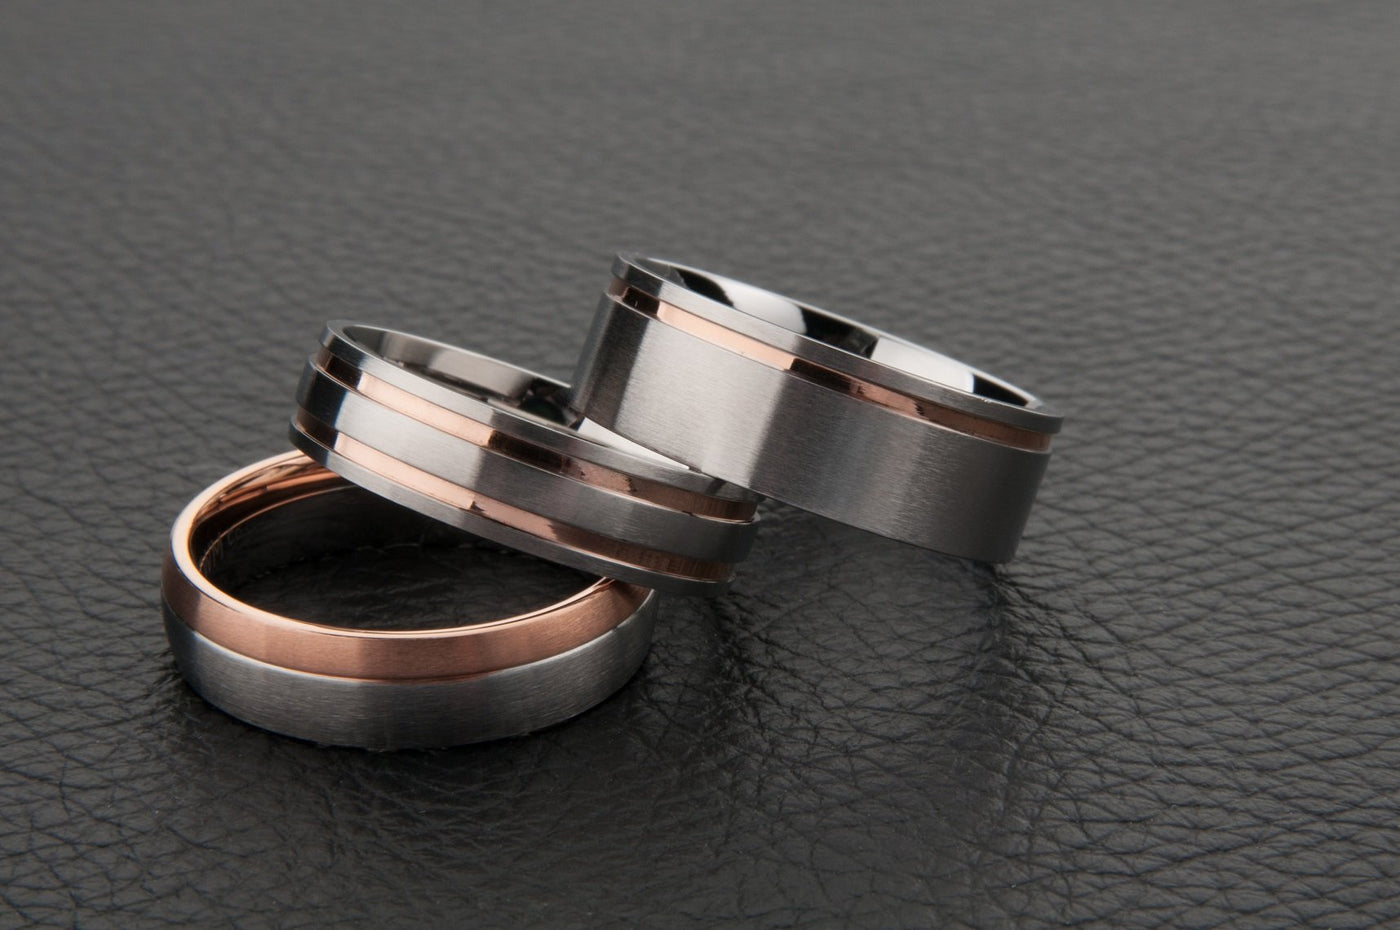 White Gold with Dual Rose Gold Striped Wedding Ring (Deluxe thickness)